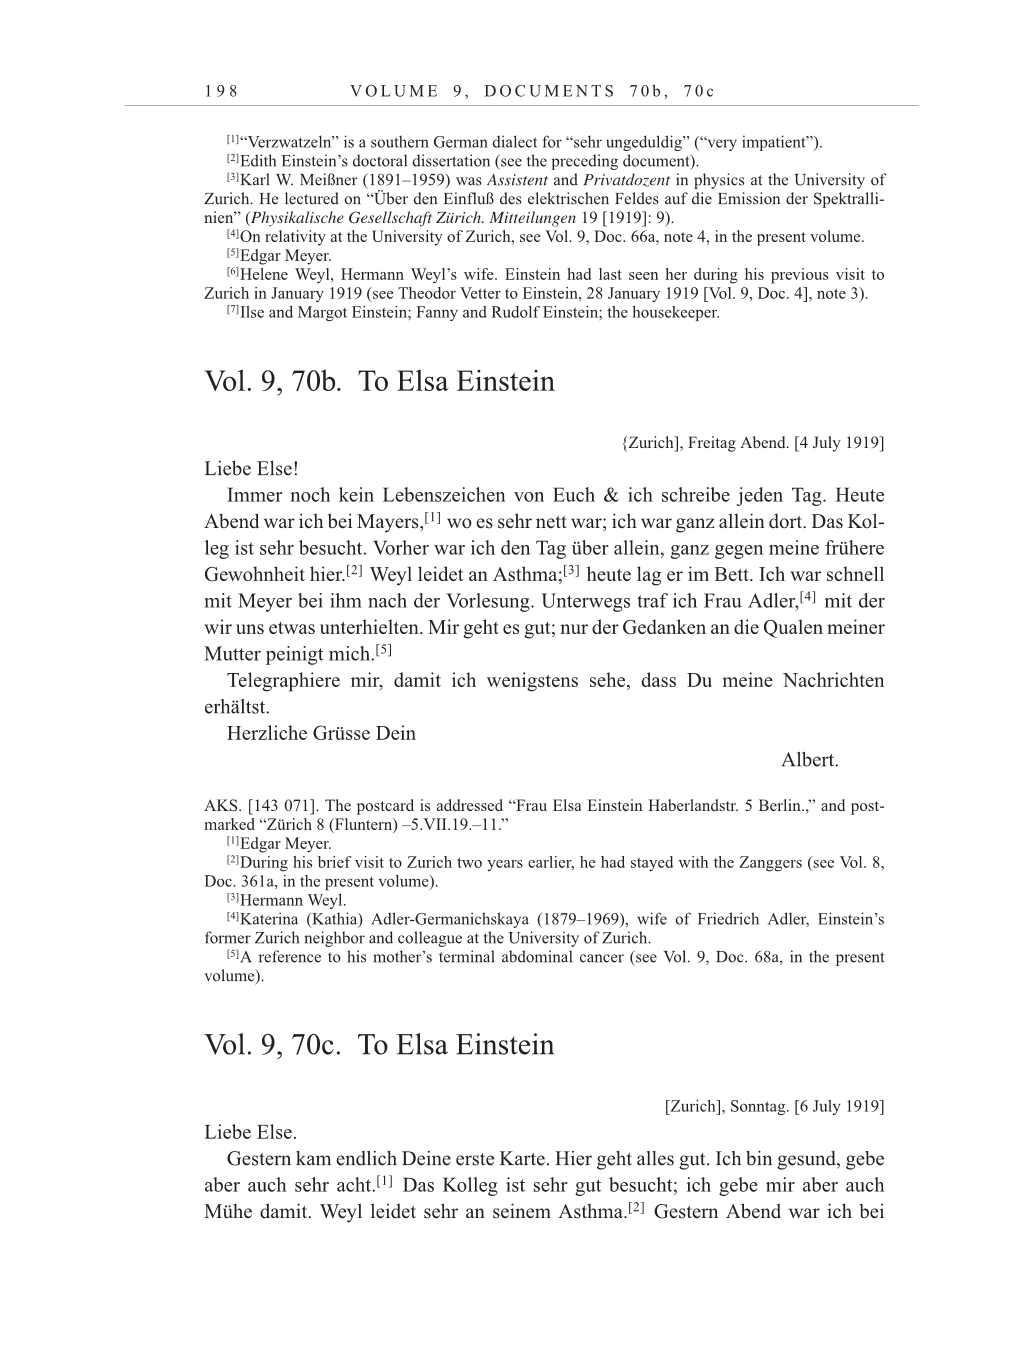 Volume 10: The Berlin Years: Correspondence May-December 1920 / Supplementary Correspondence 1909-1920 page 198